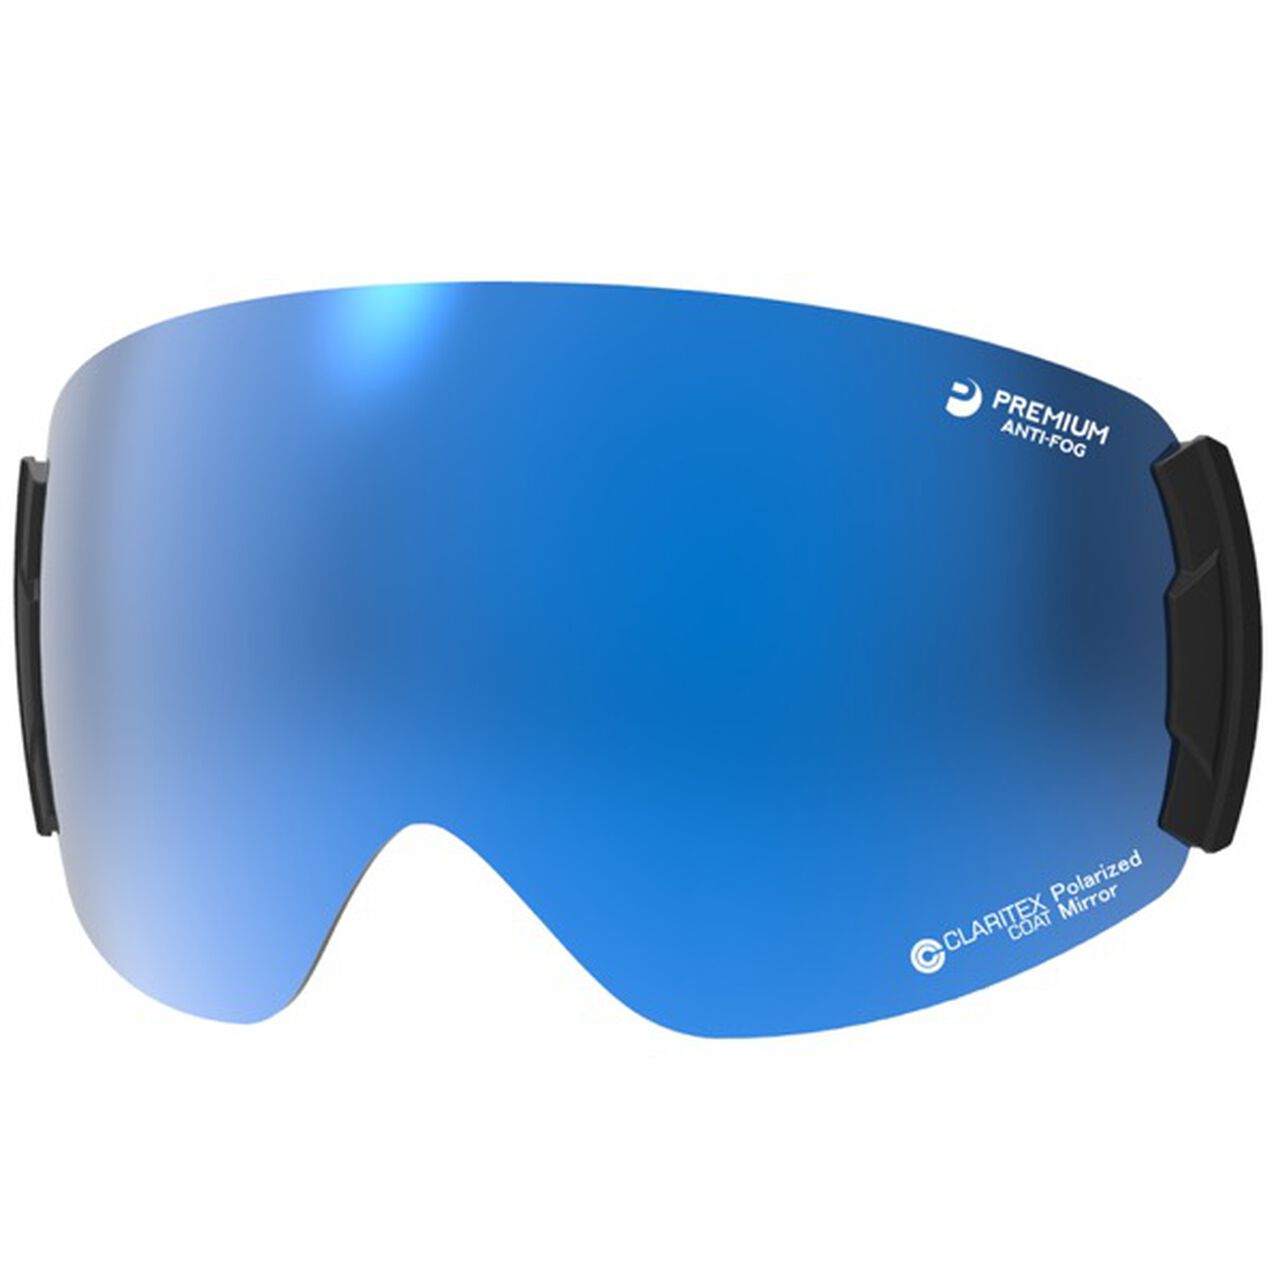 LRV-1191 MIT blue mirror x Polarized grey for ROVO,Opt11, large image number 0